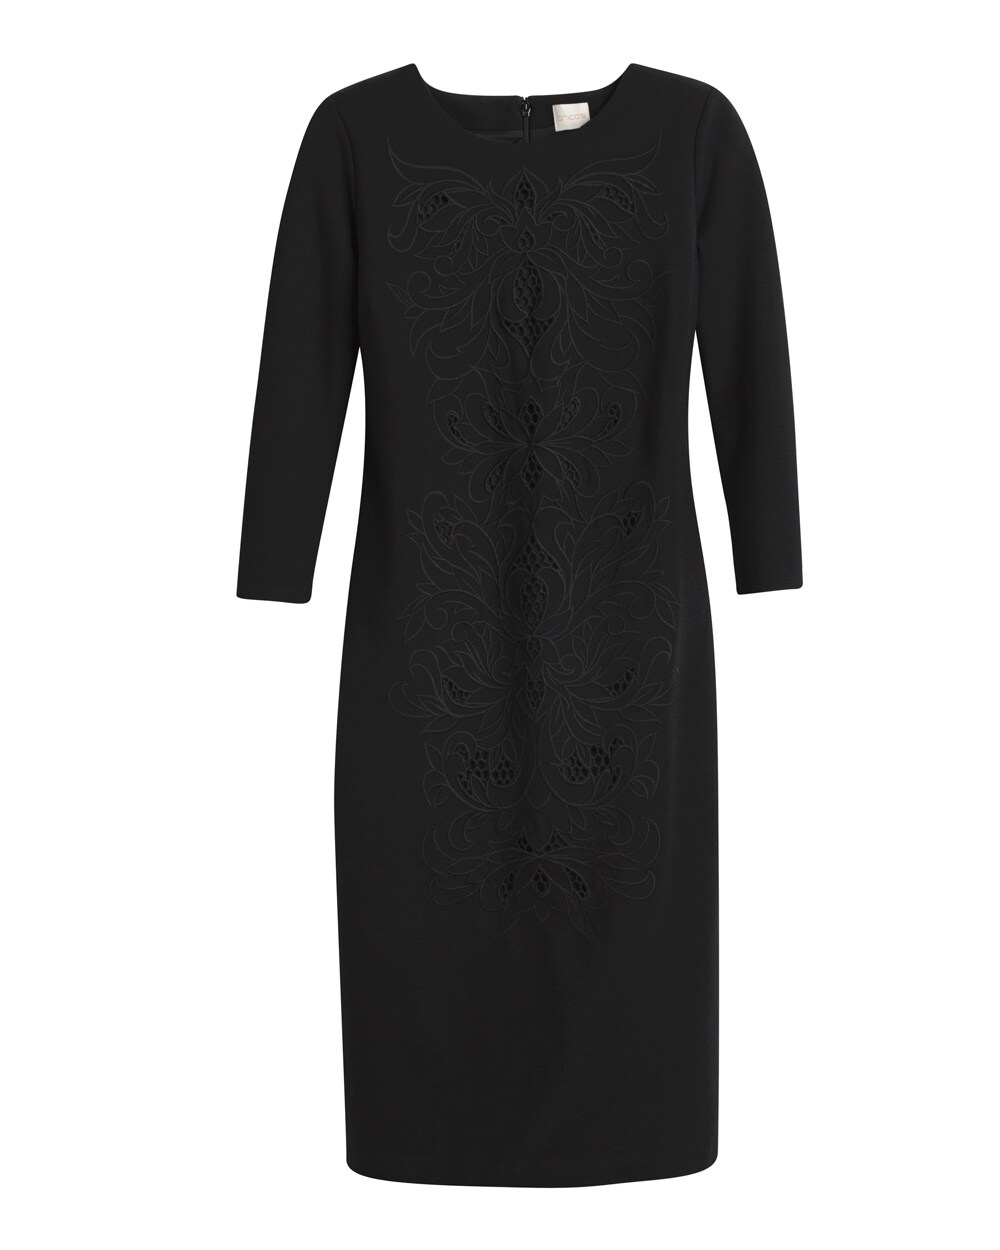 Embroidered Black Dress - Chico's